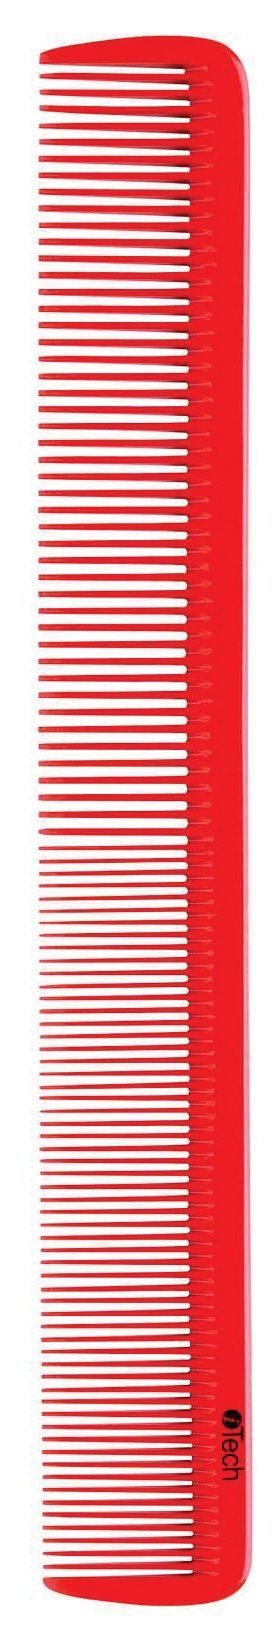 8 1/2 Cutting Comb - iTech Collection HairArt Int'l Inc.